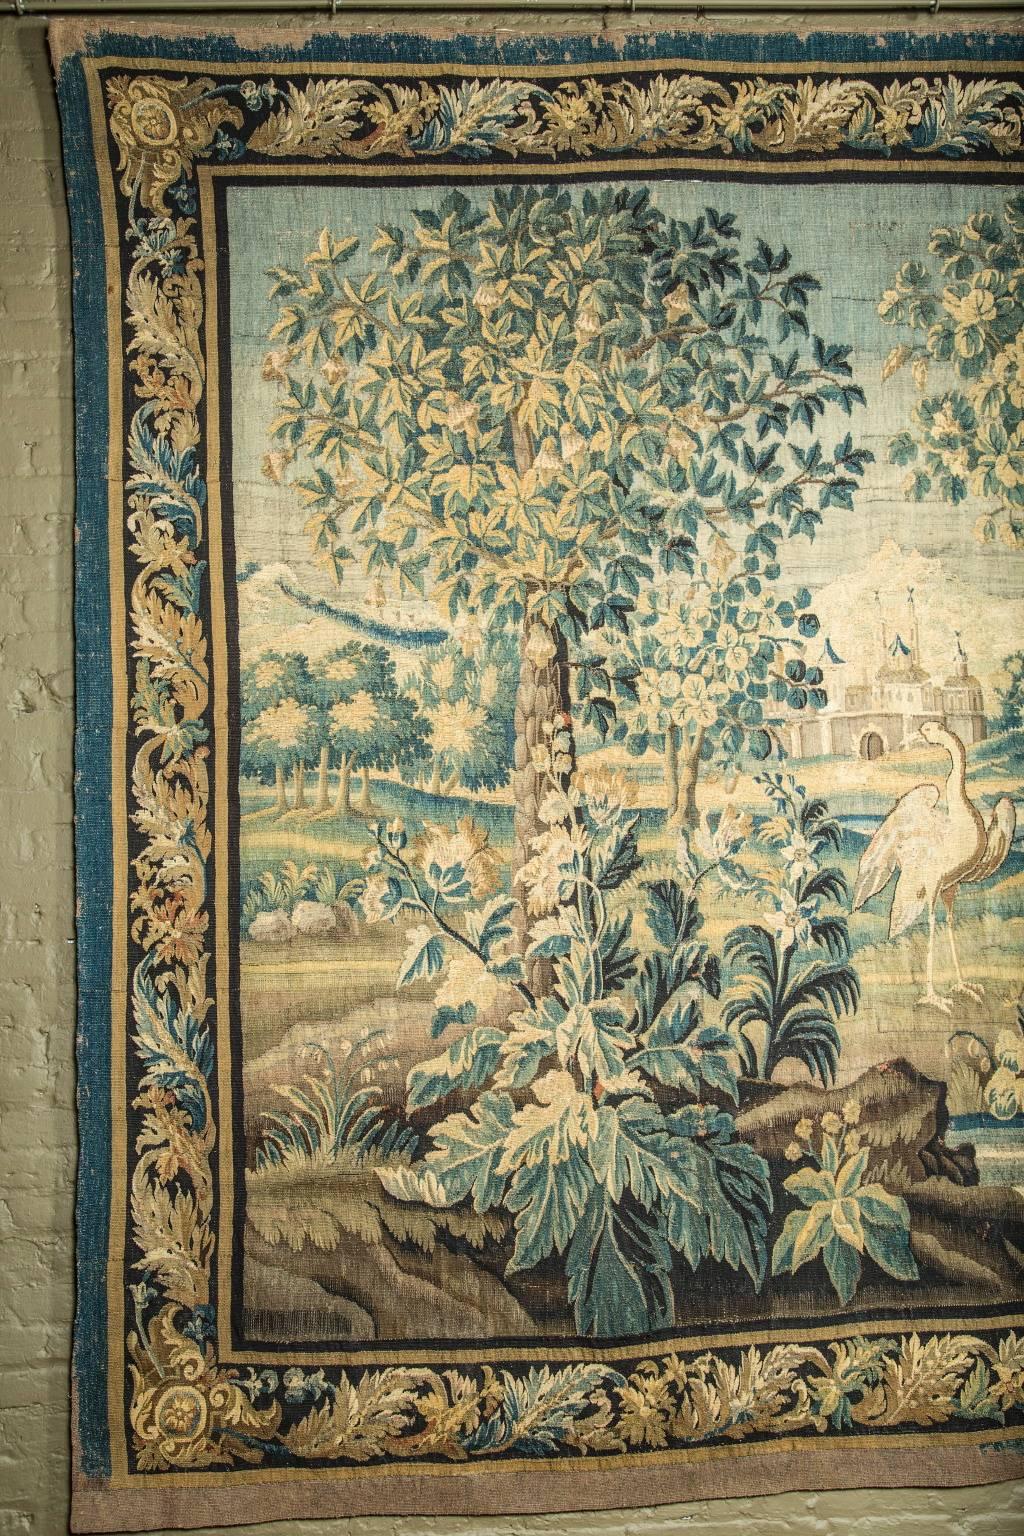 This grand French Aubusson Verdure Tapestry dates back to the 18th century and features an exotic landscape with mythical animals. A long legged bird forages amidst exotic blossoming foliage at the center. Behind it rests a grand hillside with